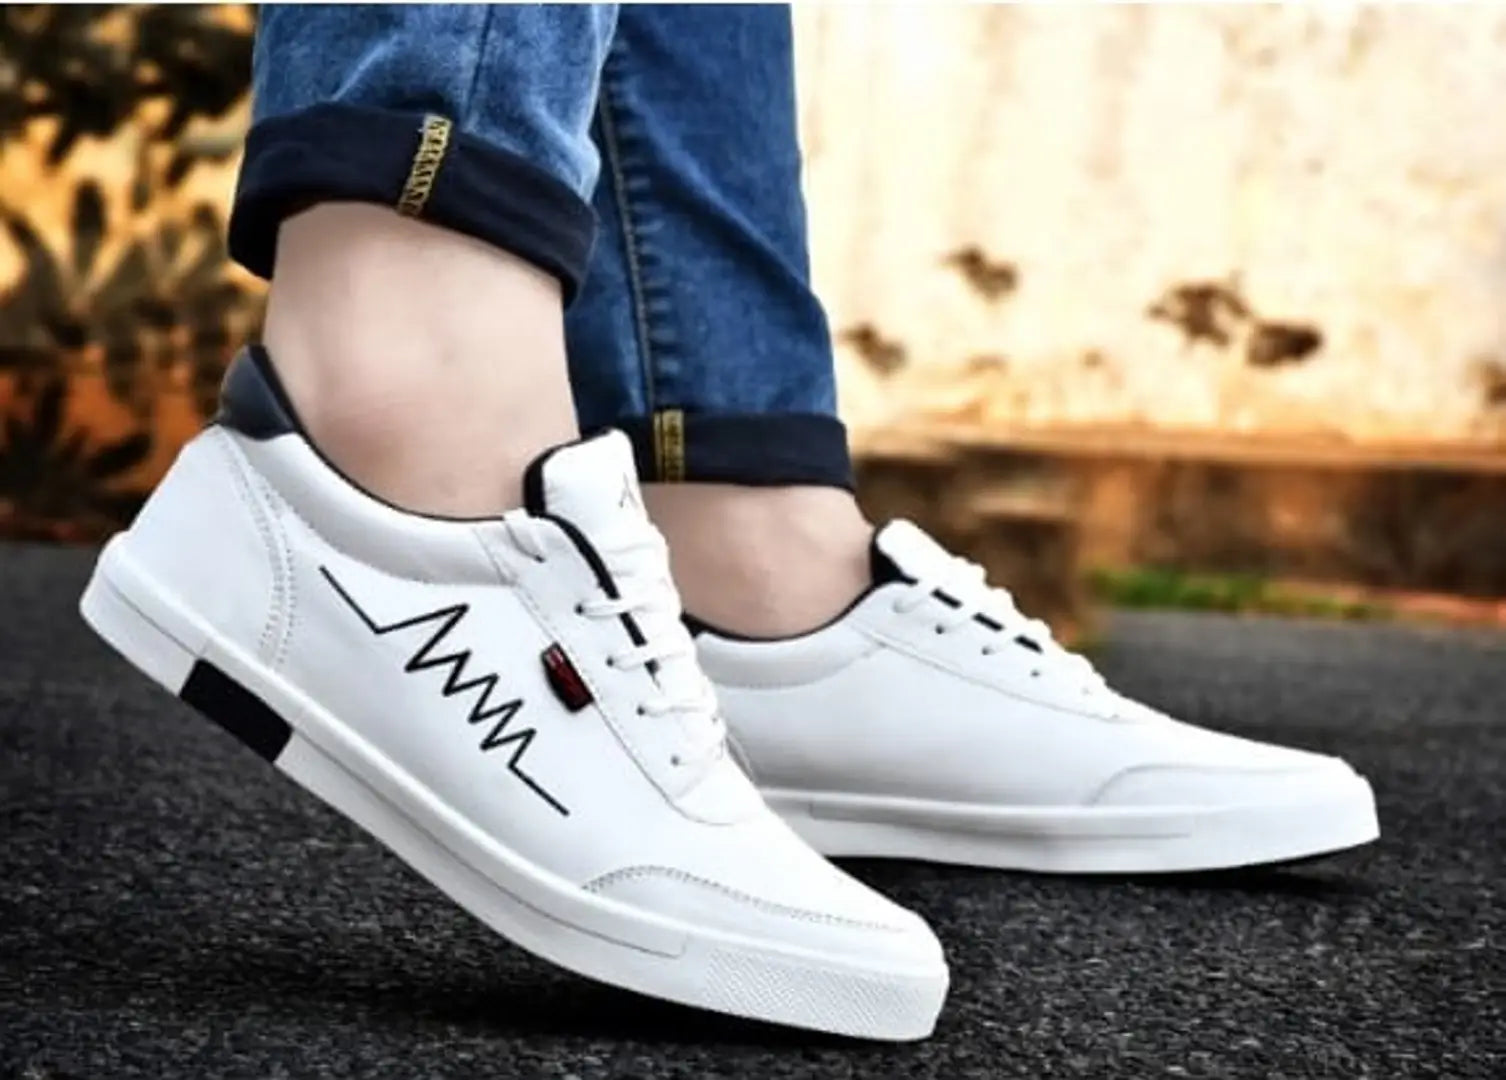 White Sports Shoes, Running Shoes, Walking Shoes, Light weight Shoes